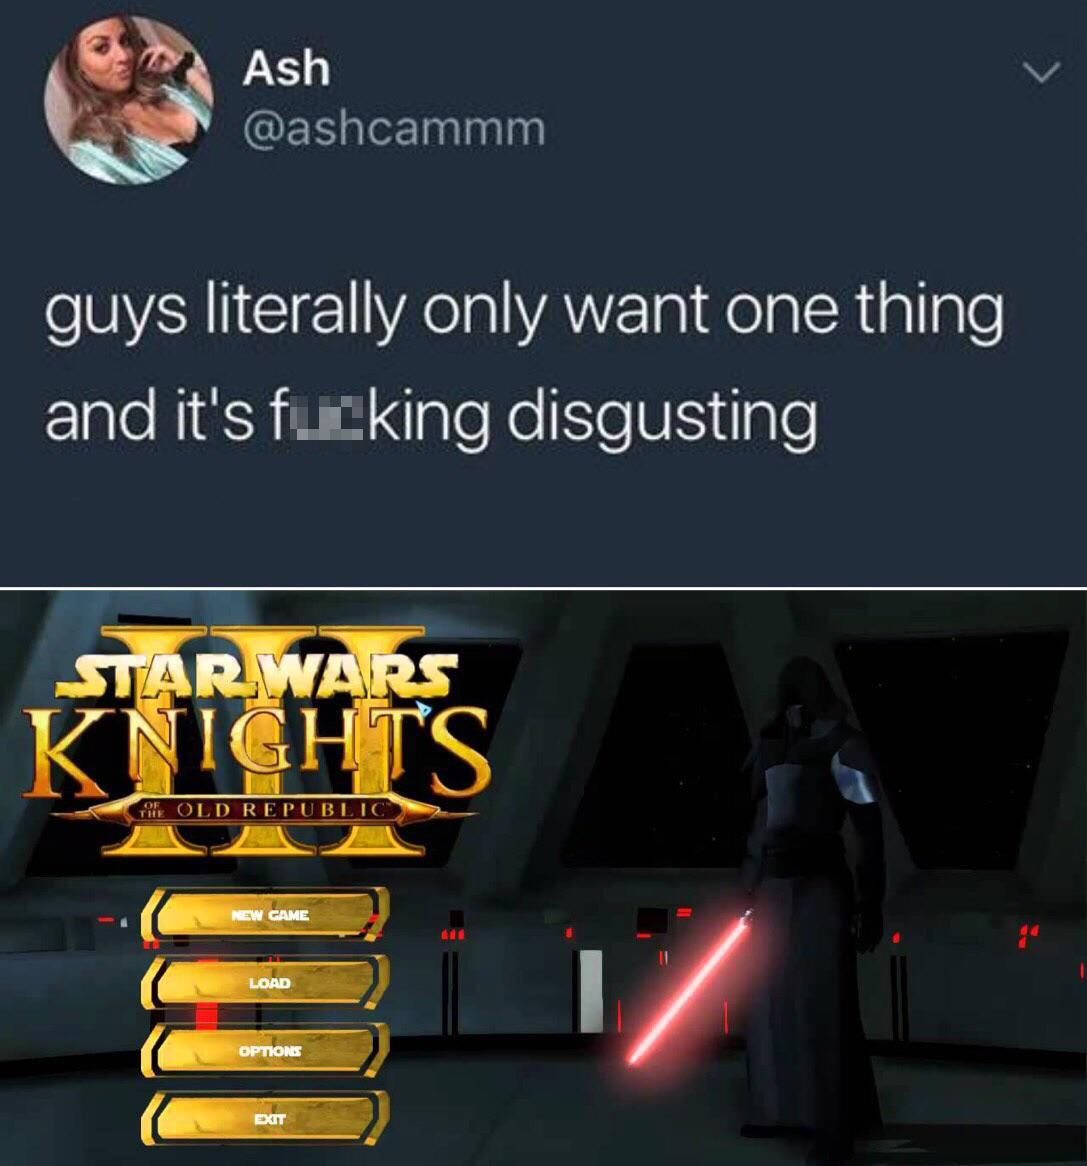 funny gaming memes - knights of the old republic - Ash guys literally only want one thing and it's fucking disgusting Star Wars Knights The Old Republic New Game Load Iiii Options Exit